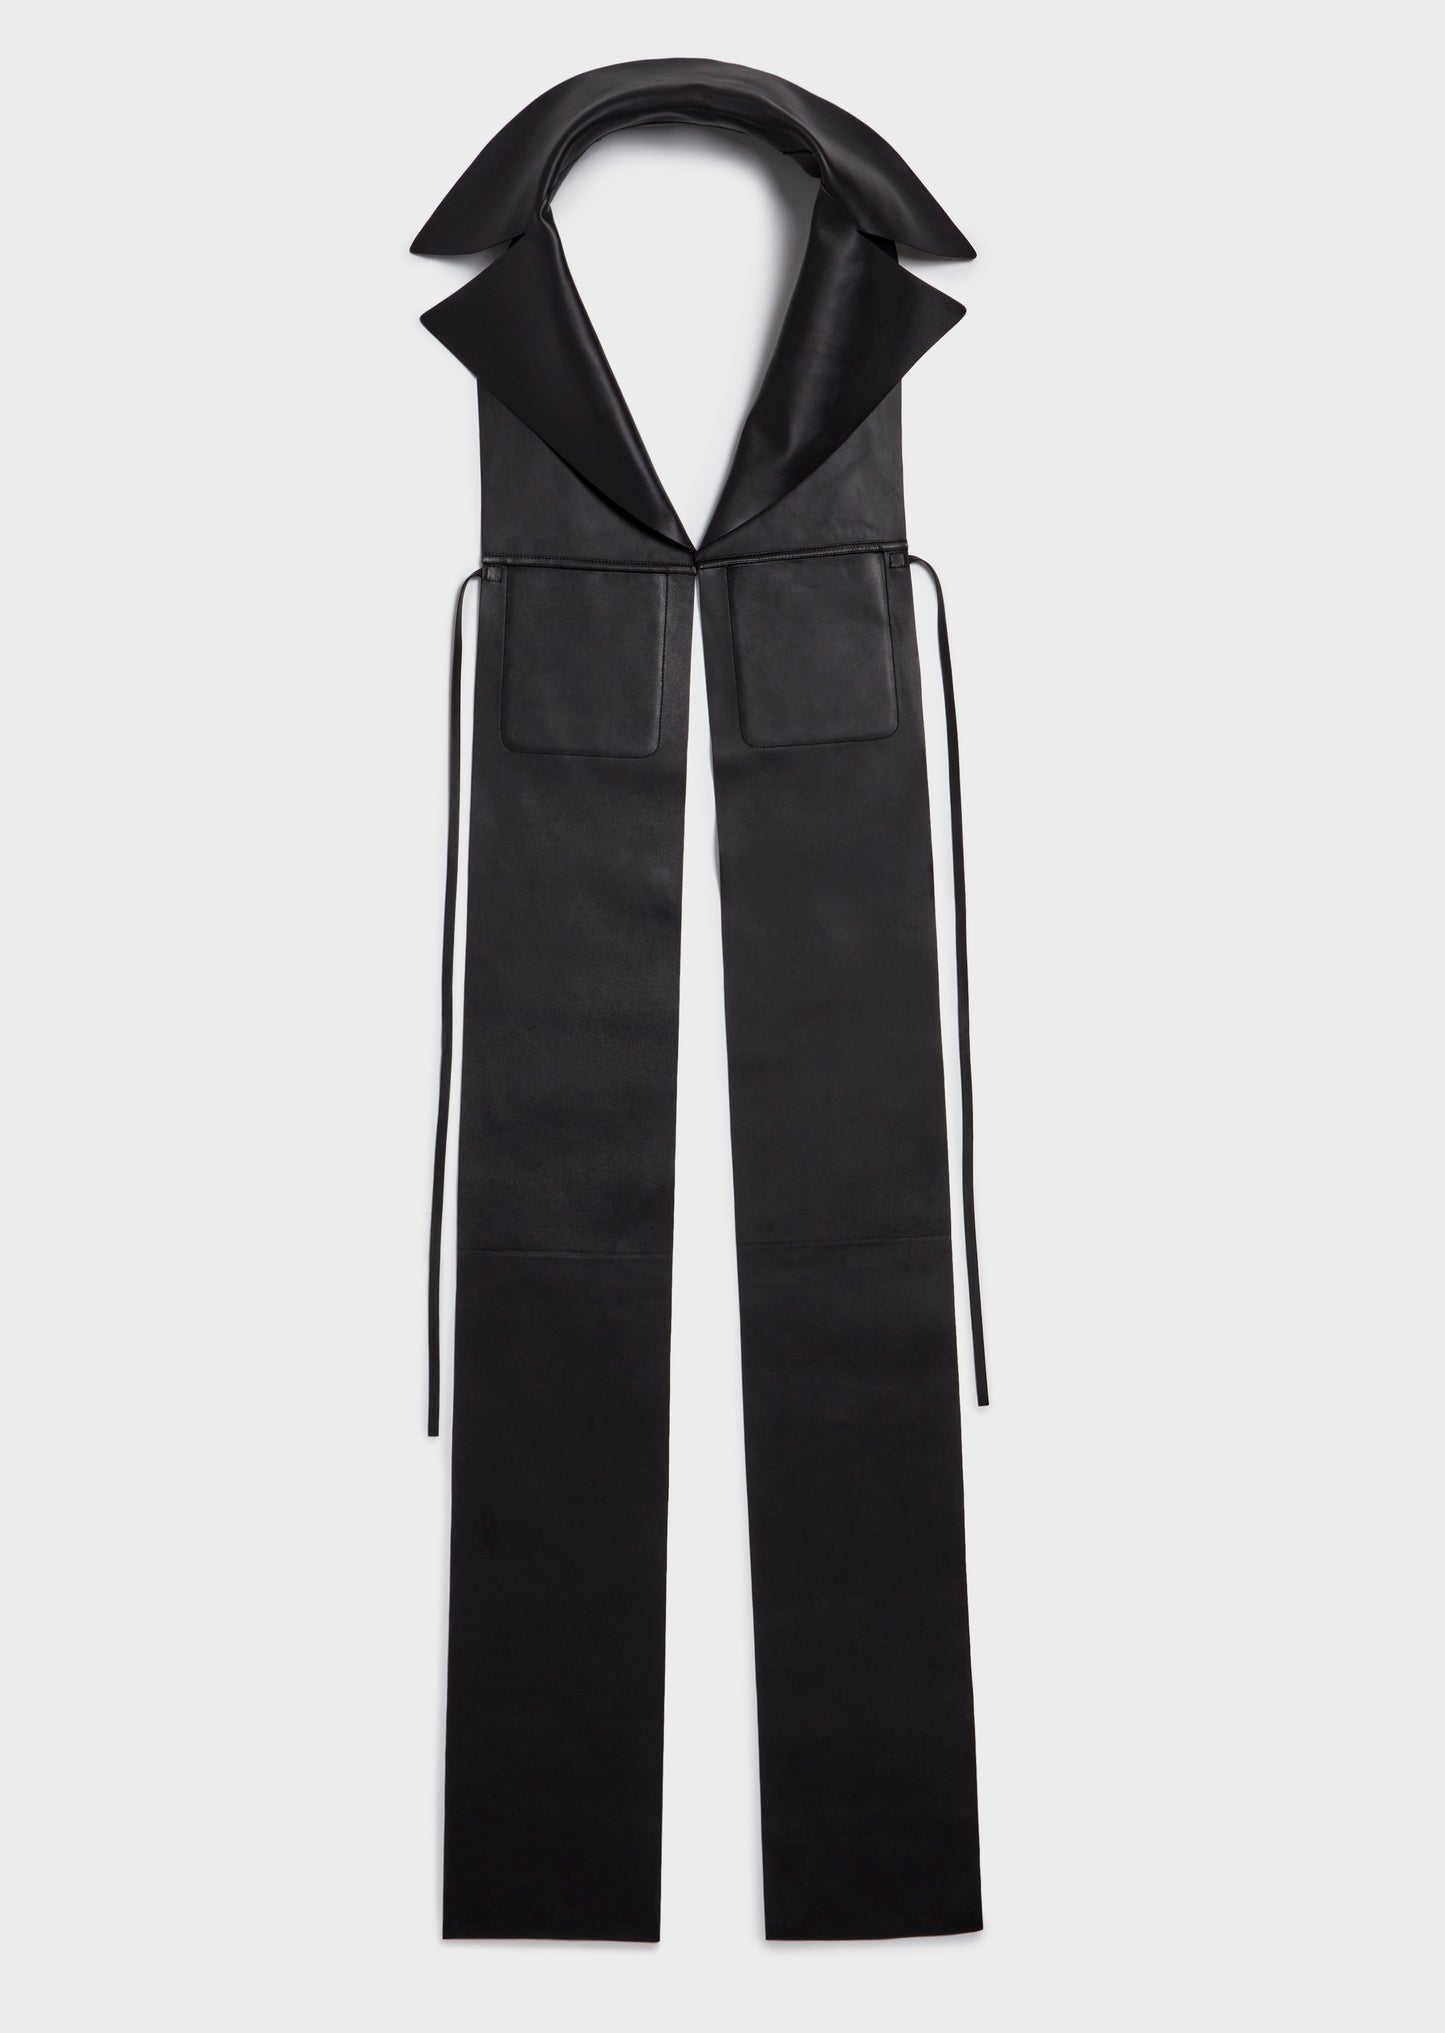 LEATHER TRENCH SCARF